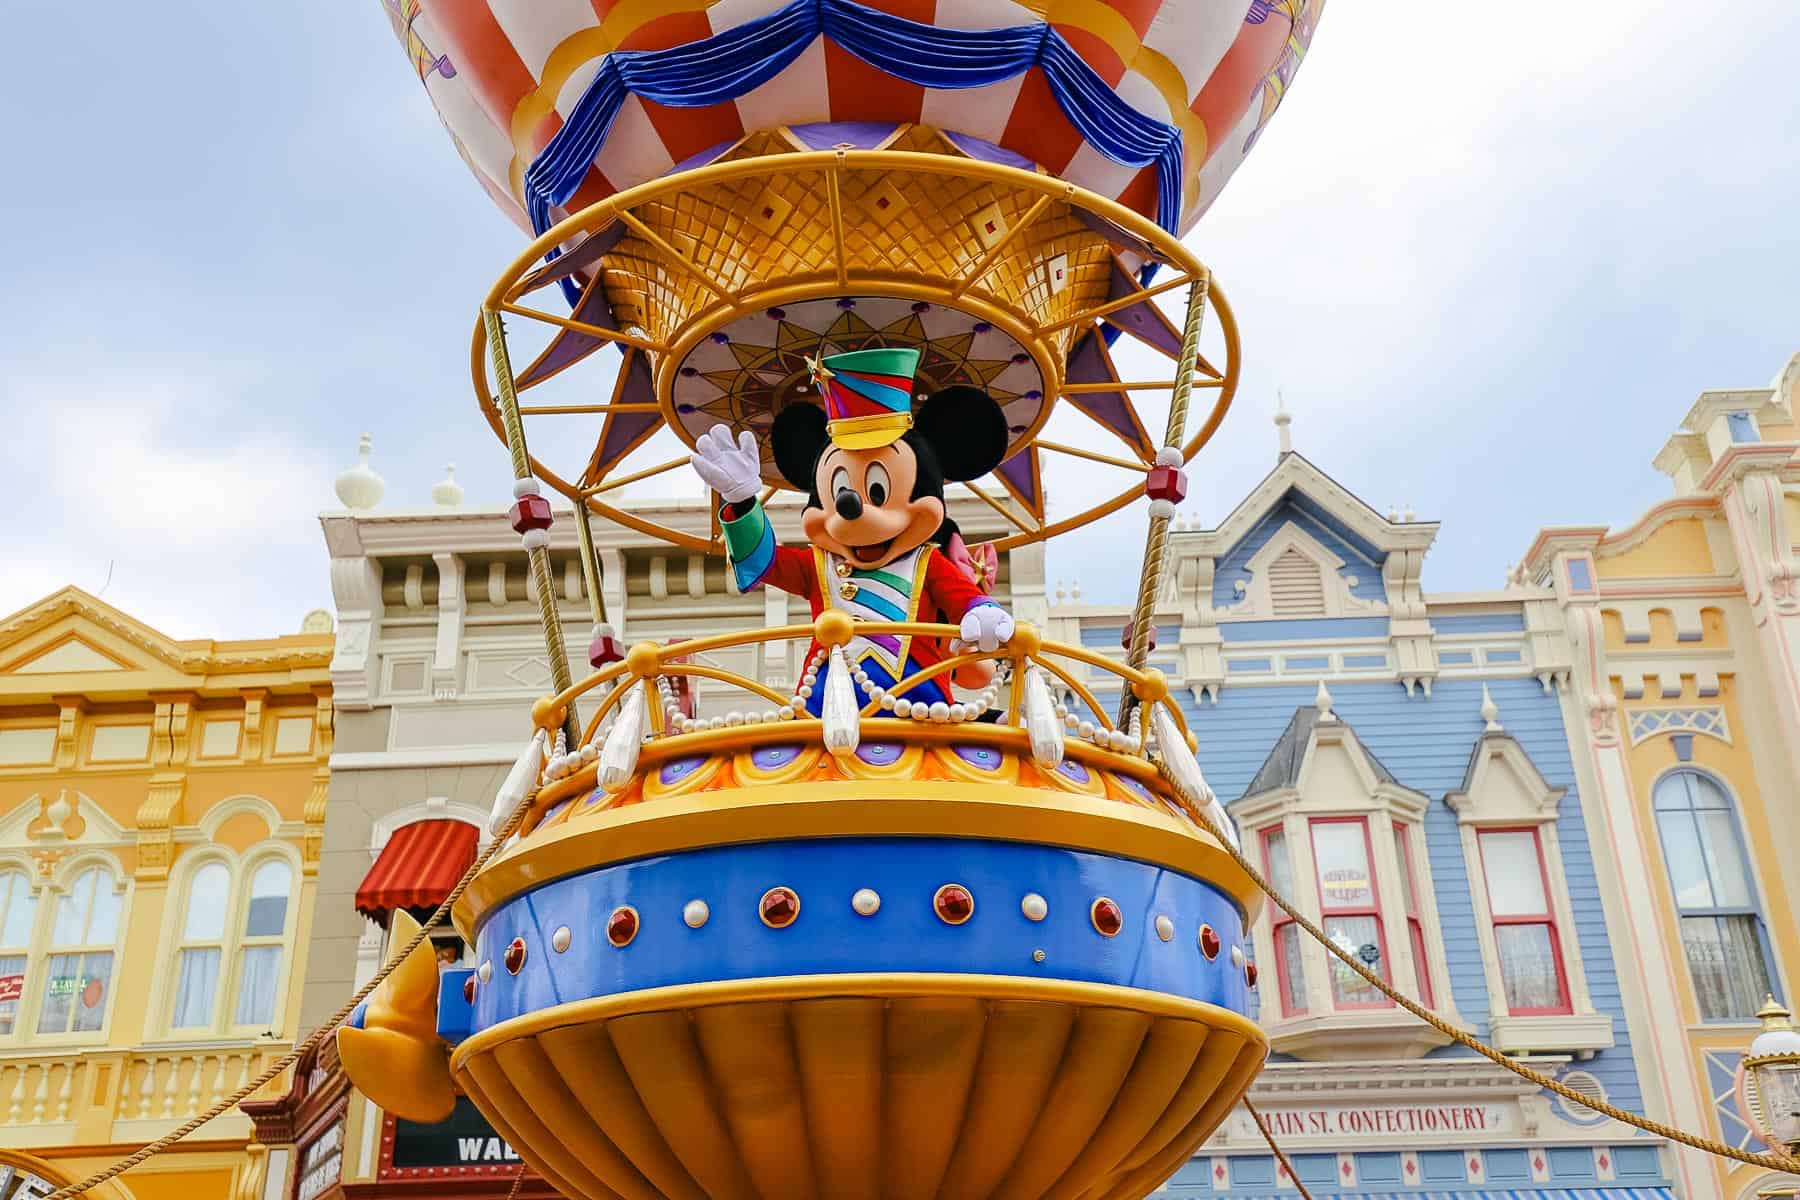 Magic Kingdom Characters Guide (The Complete Guide with Tips, Autographs, and Photos)